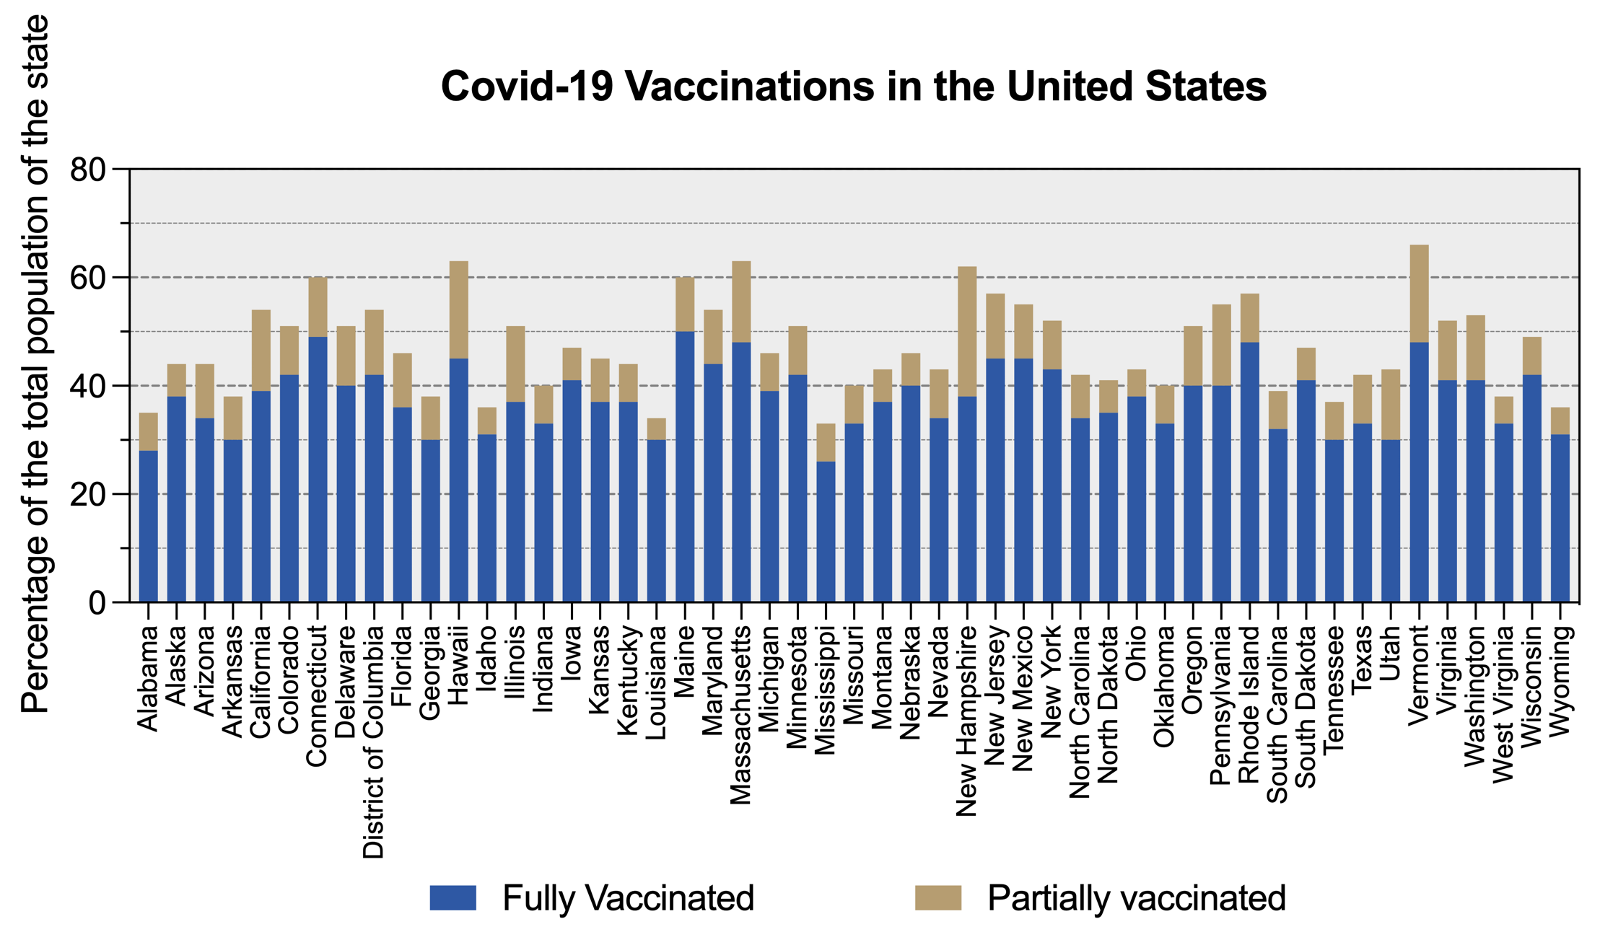 COVID-19 Vaccinations in the United States